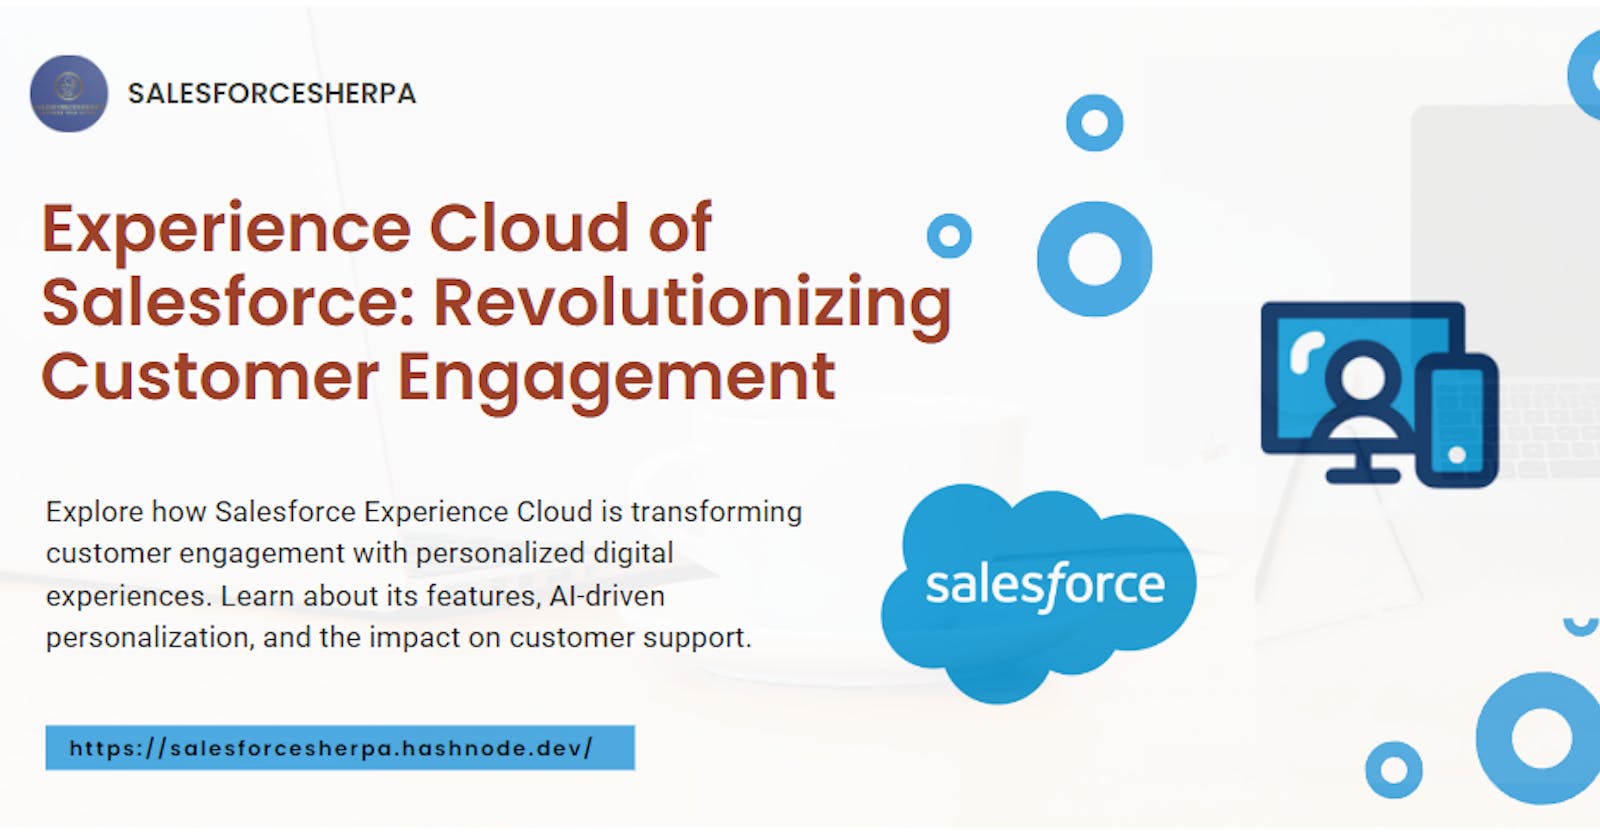 Experience Cloud of Salesforce: Revolutionizing Customer Engagement